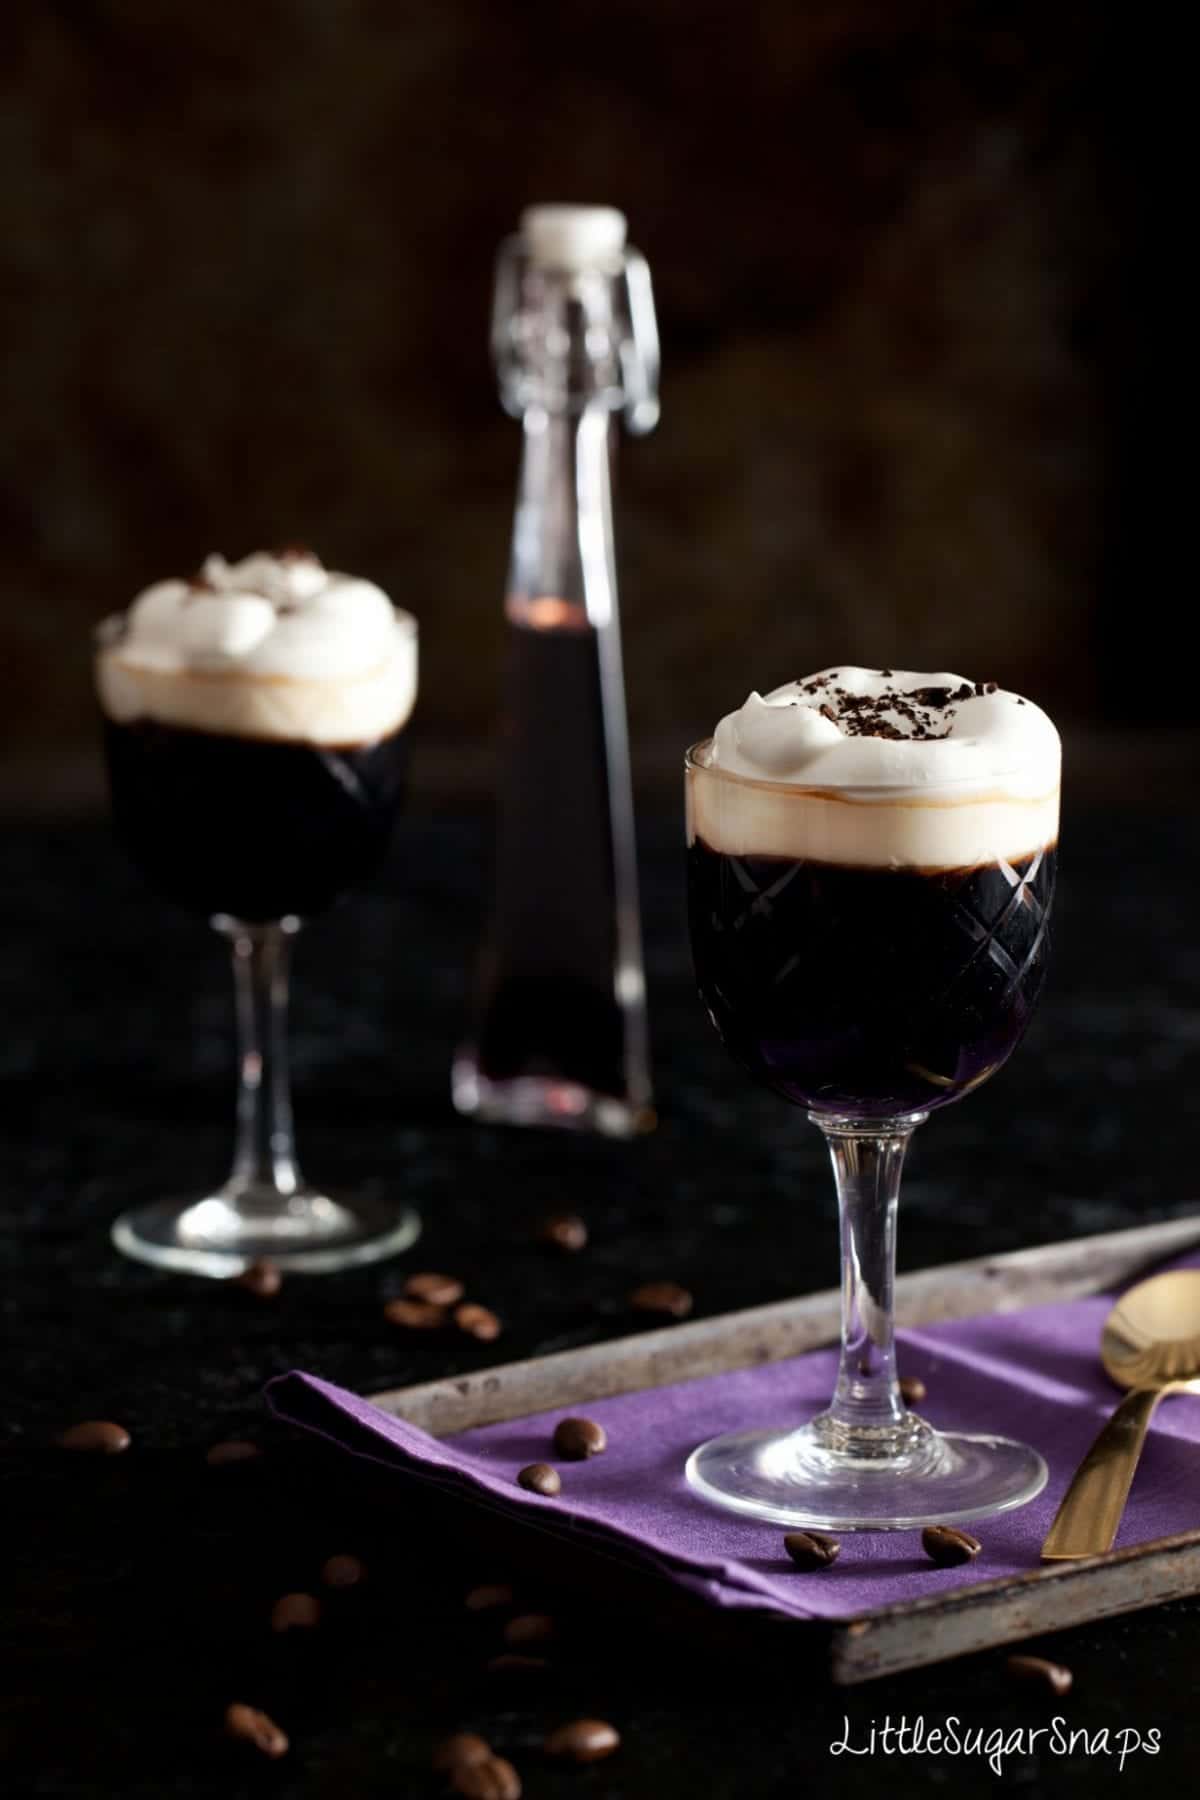 Coffee drinks topped with whipped cream with blackcurrant liqueur bottle behind